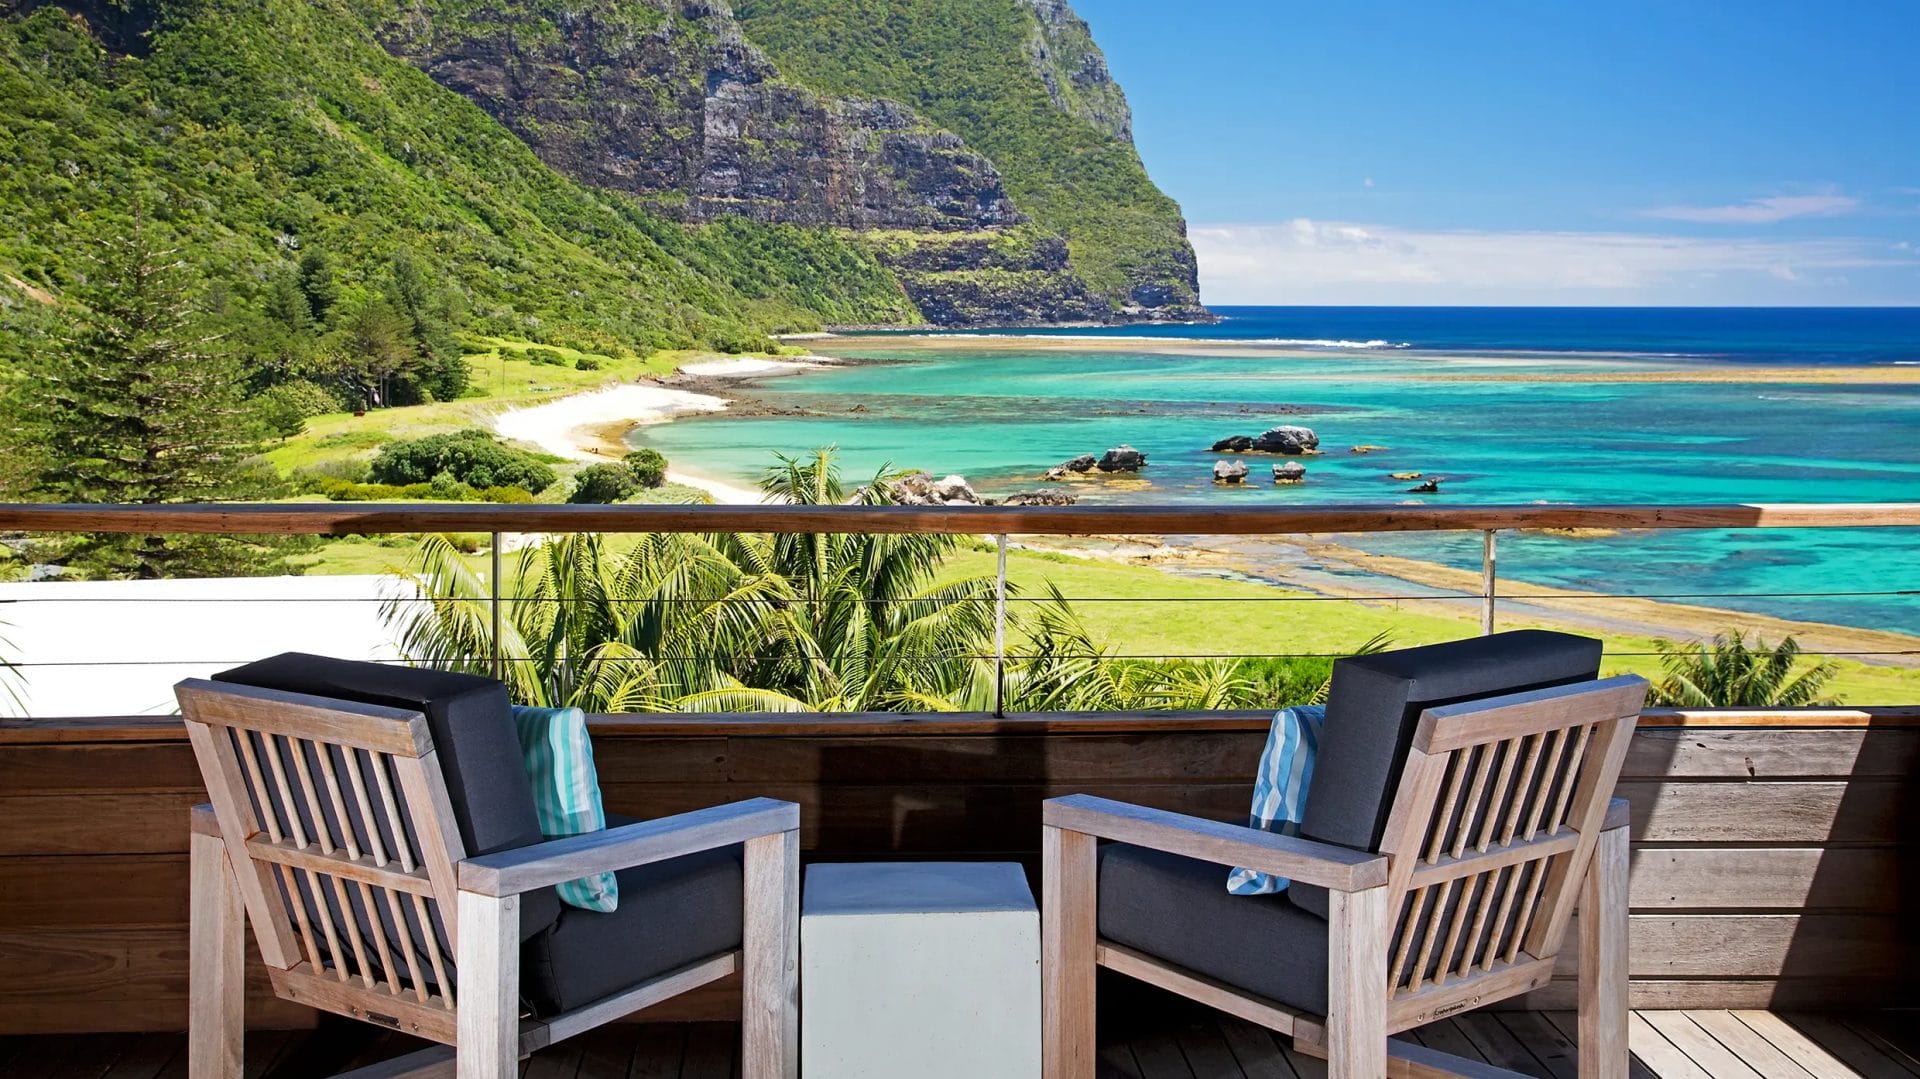 Views from Capella Lodge’s deck on Lord Howe Island, overlooking Lover’s Bay